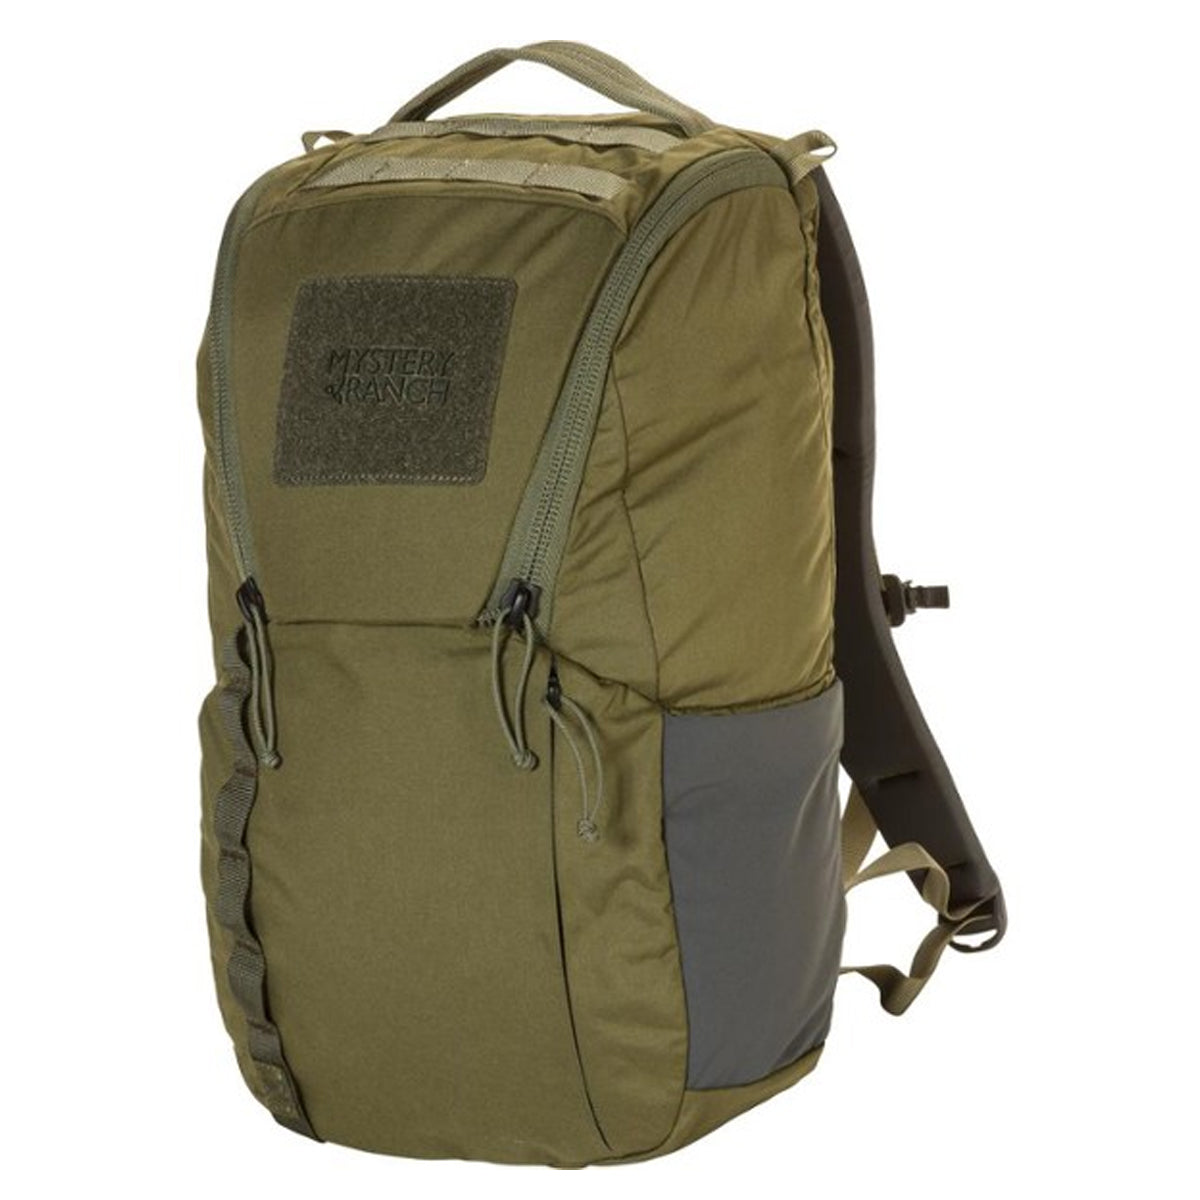 Mystery Ranch Rip Ruck 15 Backpack in  by GOHUNT | Mystery Ranch - GOHUNT Shop